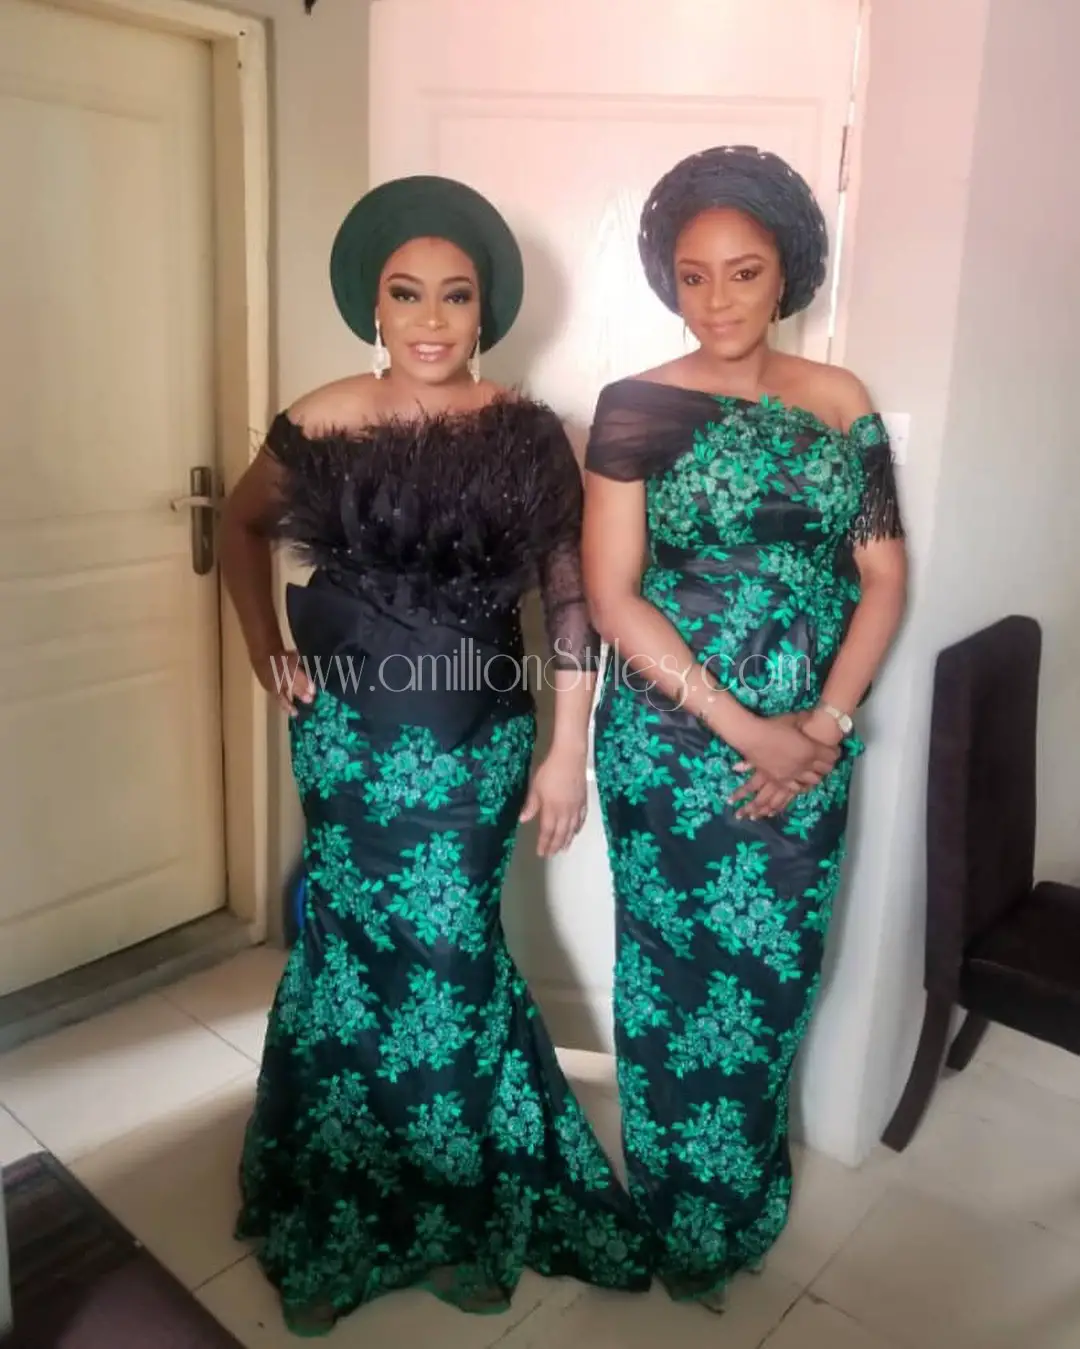 Off To An Owambe? Peek Through These 10 Asoebi Styles Real Quick!